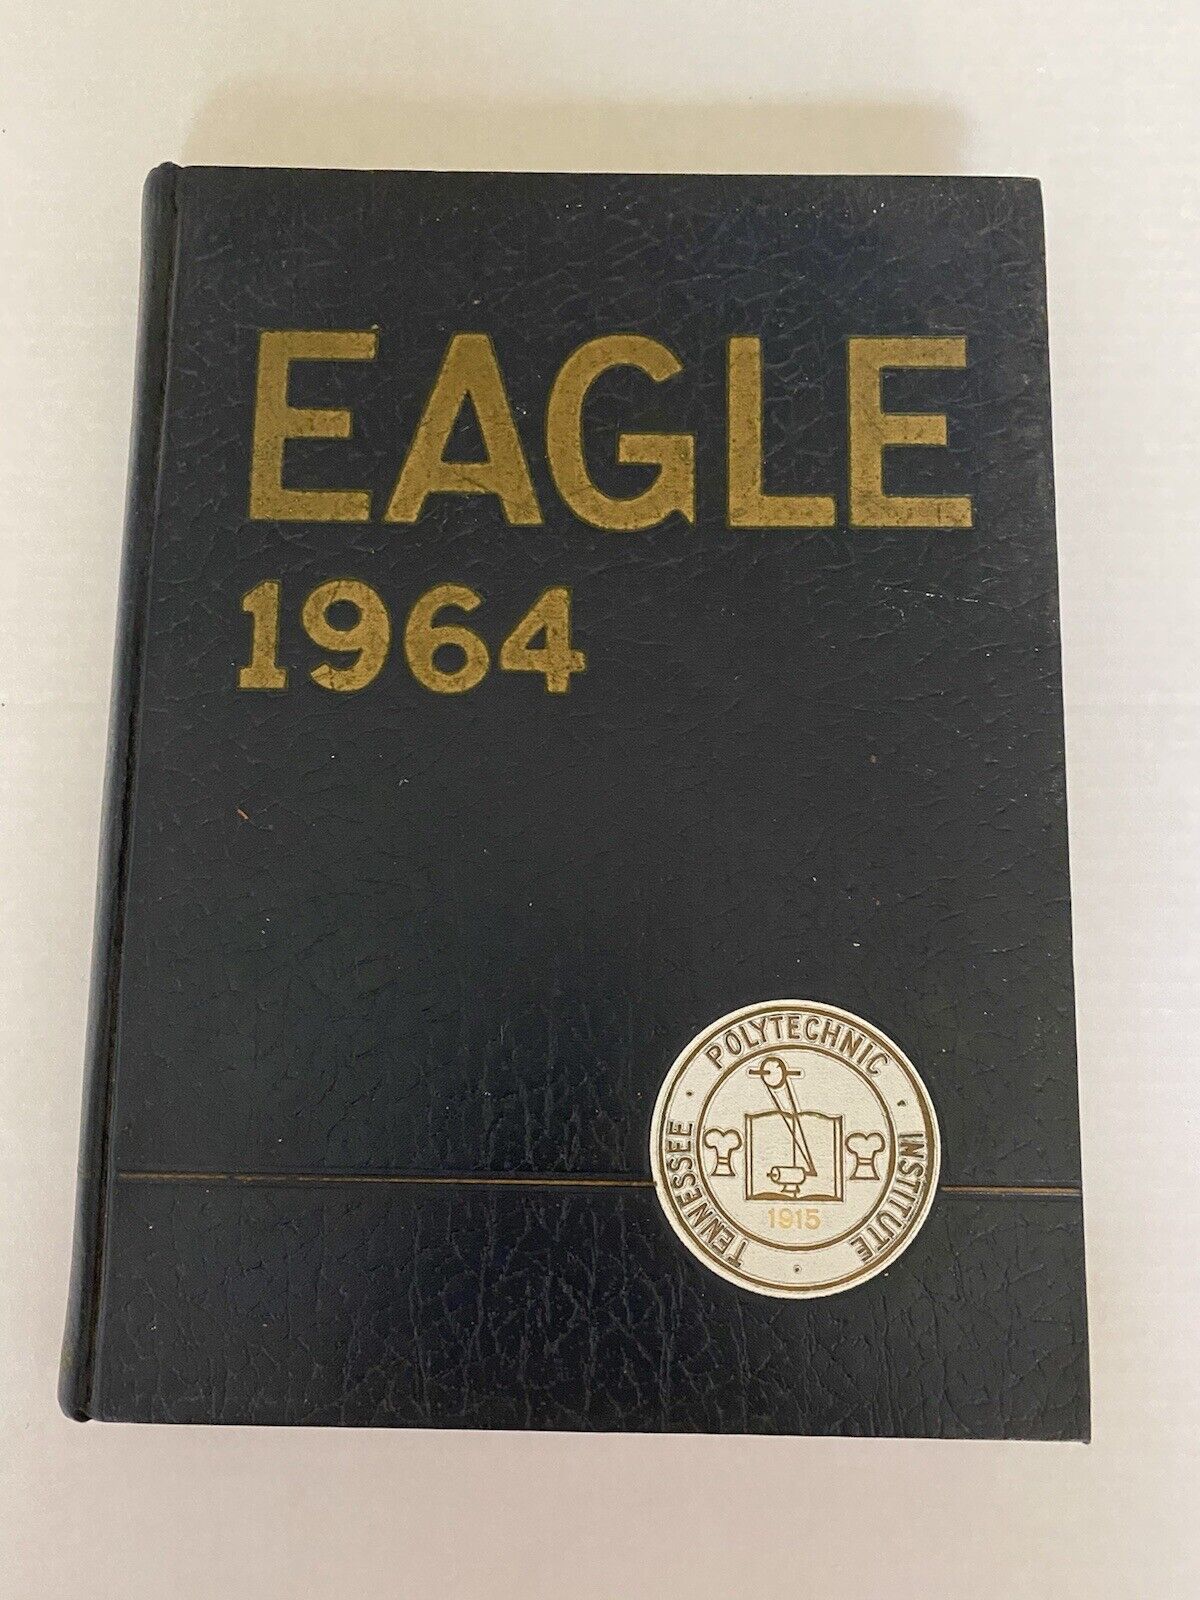 1964 Tennessee Tech Yearbook, Cookeville, TN. The Eagle